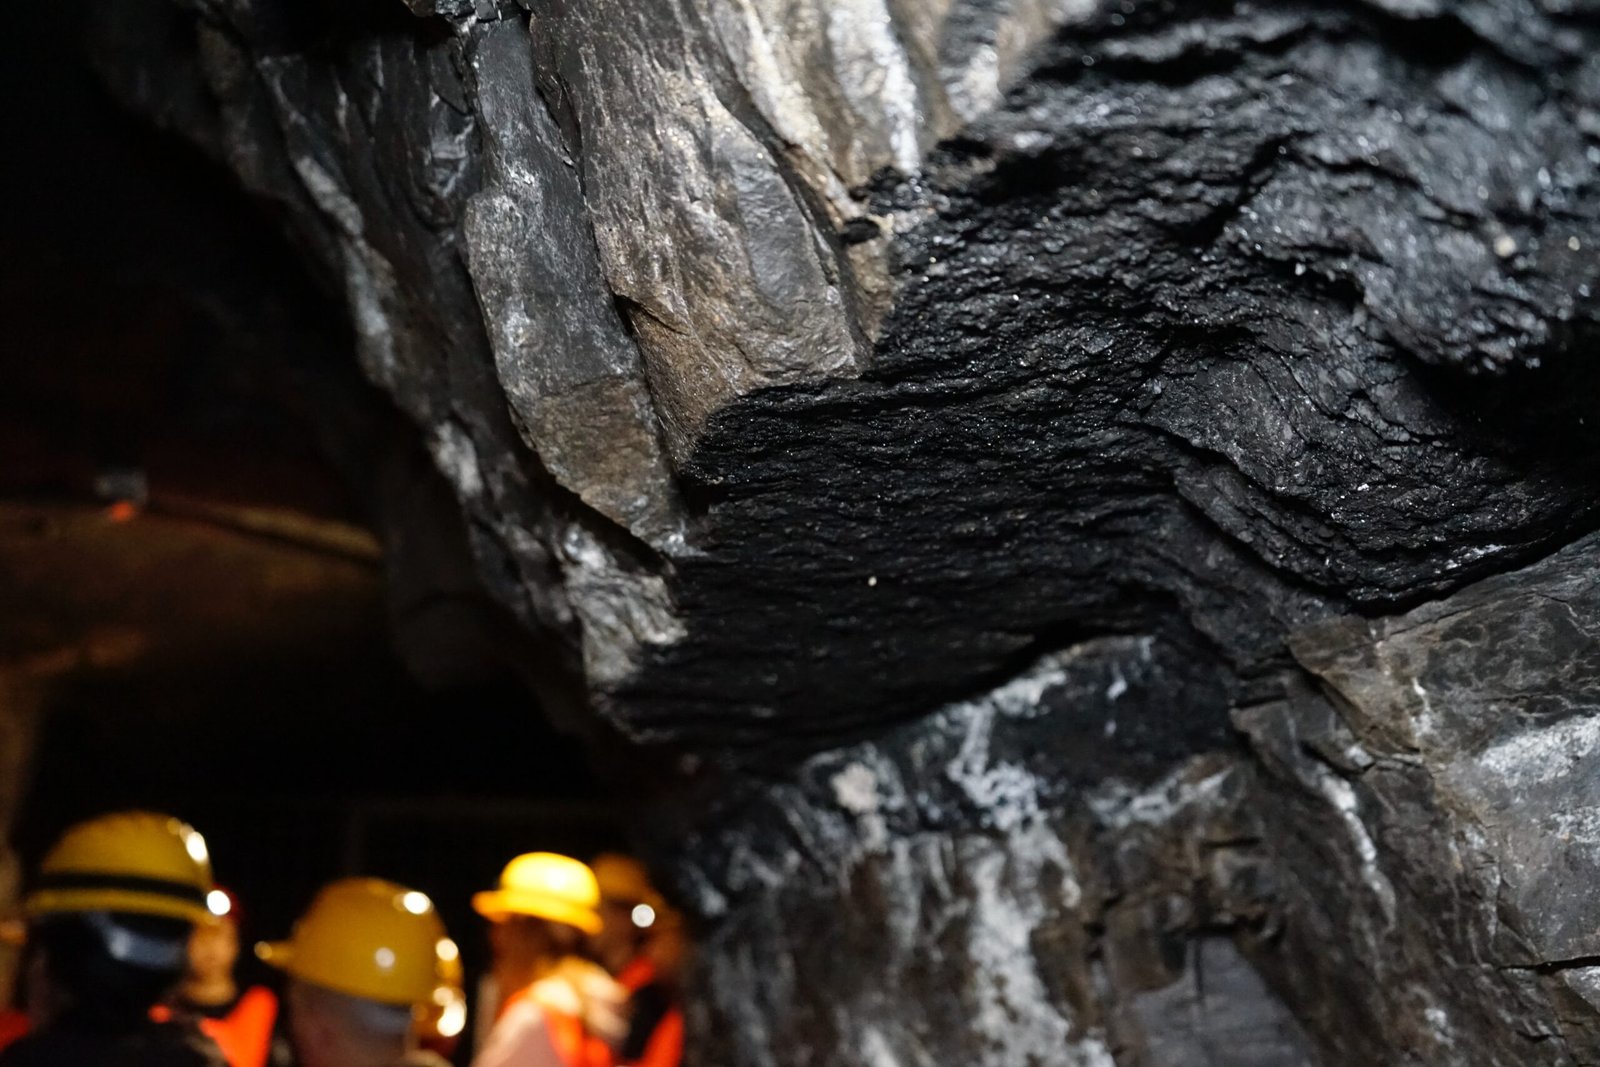 Close-up photo of coal seams in an underground mine, with the out-of-focus silhouettes of miners wearing safety helmets in the background, highlighting the extraction of fossil fuels and the workers who are integral to the coal industry.